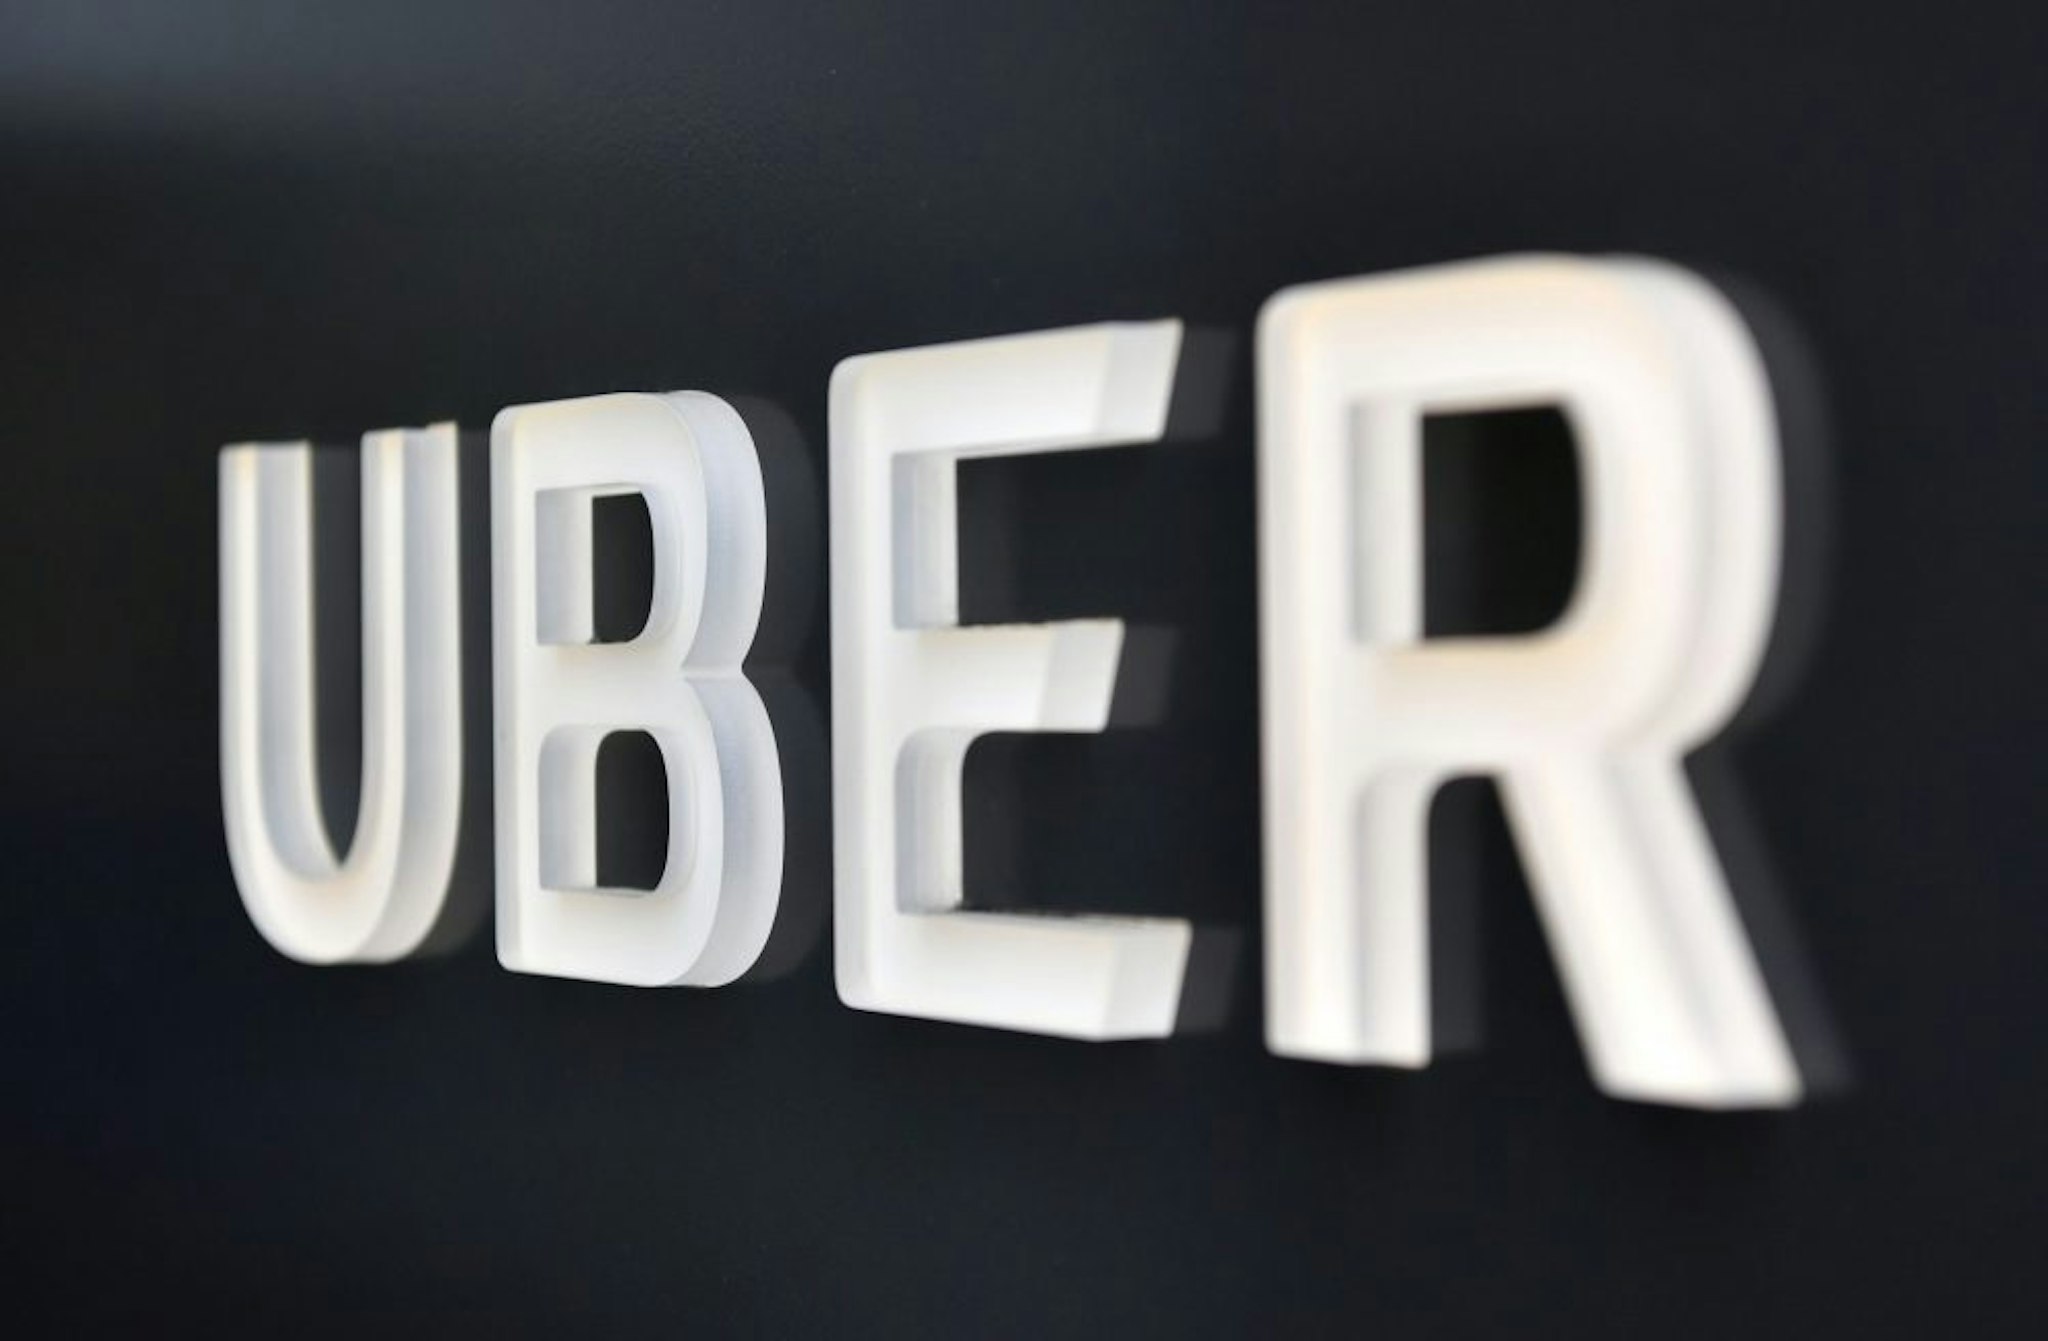 The Uber logo is seen outside the Uber Corporate Headquarters building in San Francisco, California on February 05, 2018. - The billion-dollar trial pitting Alphabet-owned autonomous driving unit Waymo against Uber started in what could be a blockbuster case between two technology giants over alleged theft of trade secrets. The San Francisco courtroom battle will take place as Waymo and Uber race to perfect self-driving cars that people could summon for rides as desired in a turn away from car ownership.